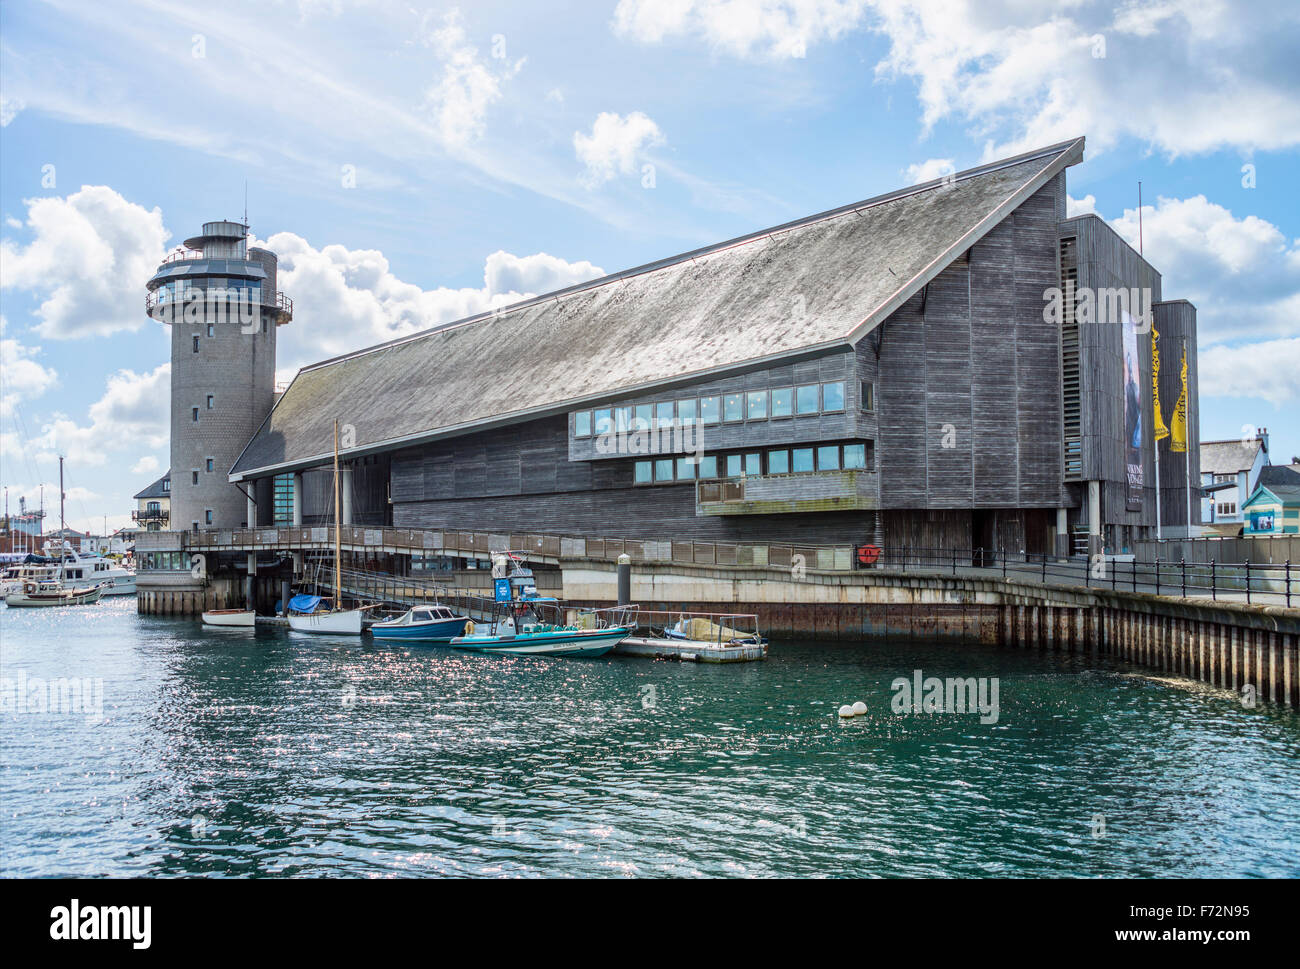 National Maritime Museum at the harbor of Falmouth, Cornwall, England, UK Stock Photo